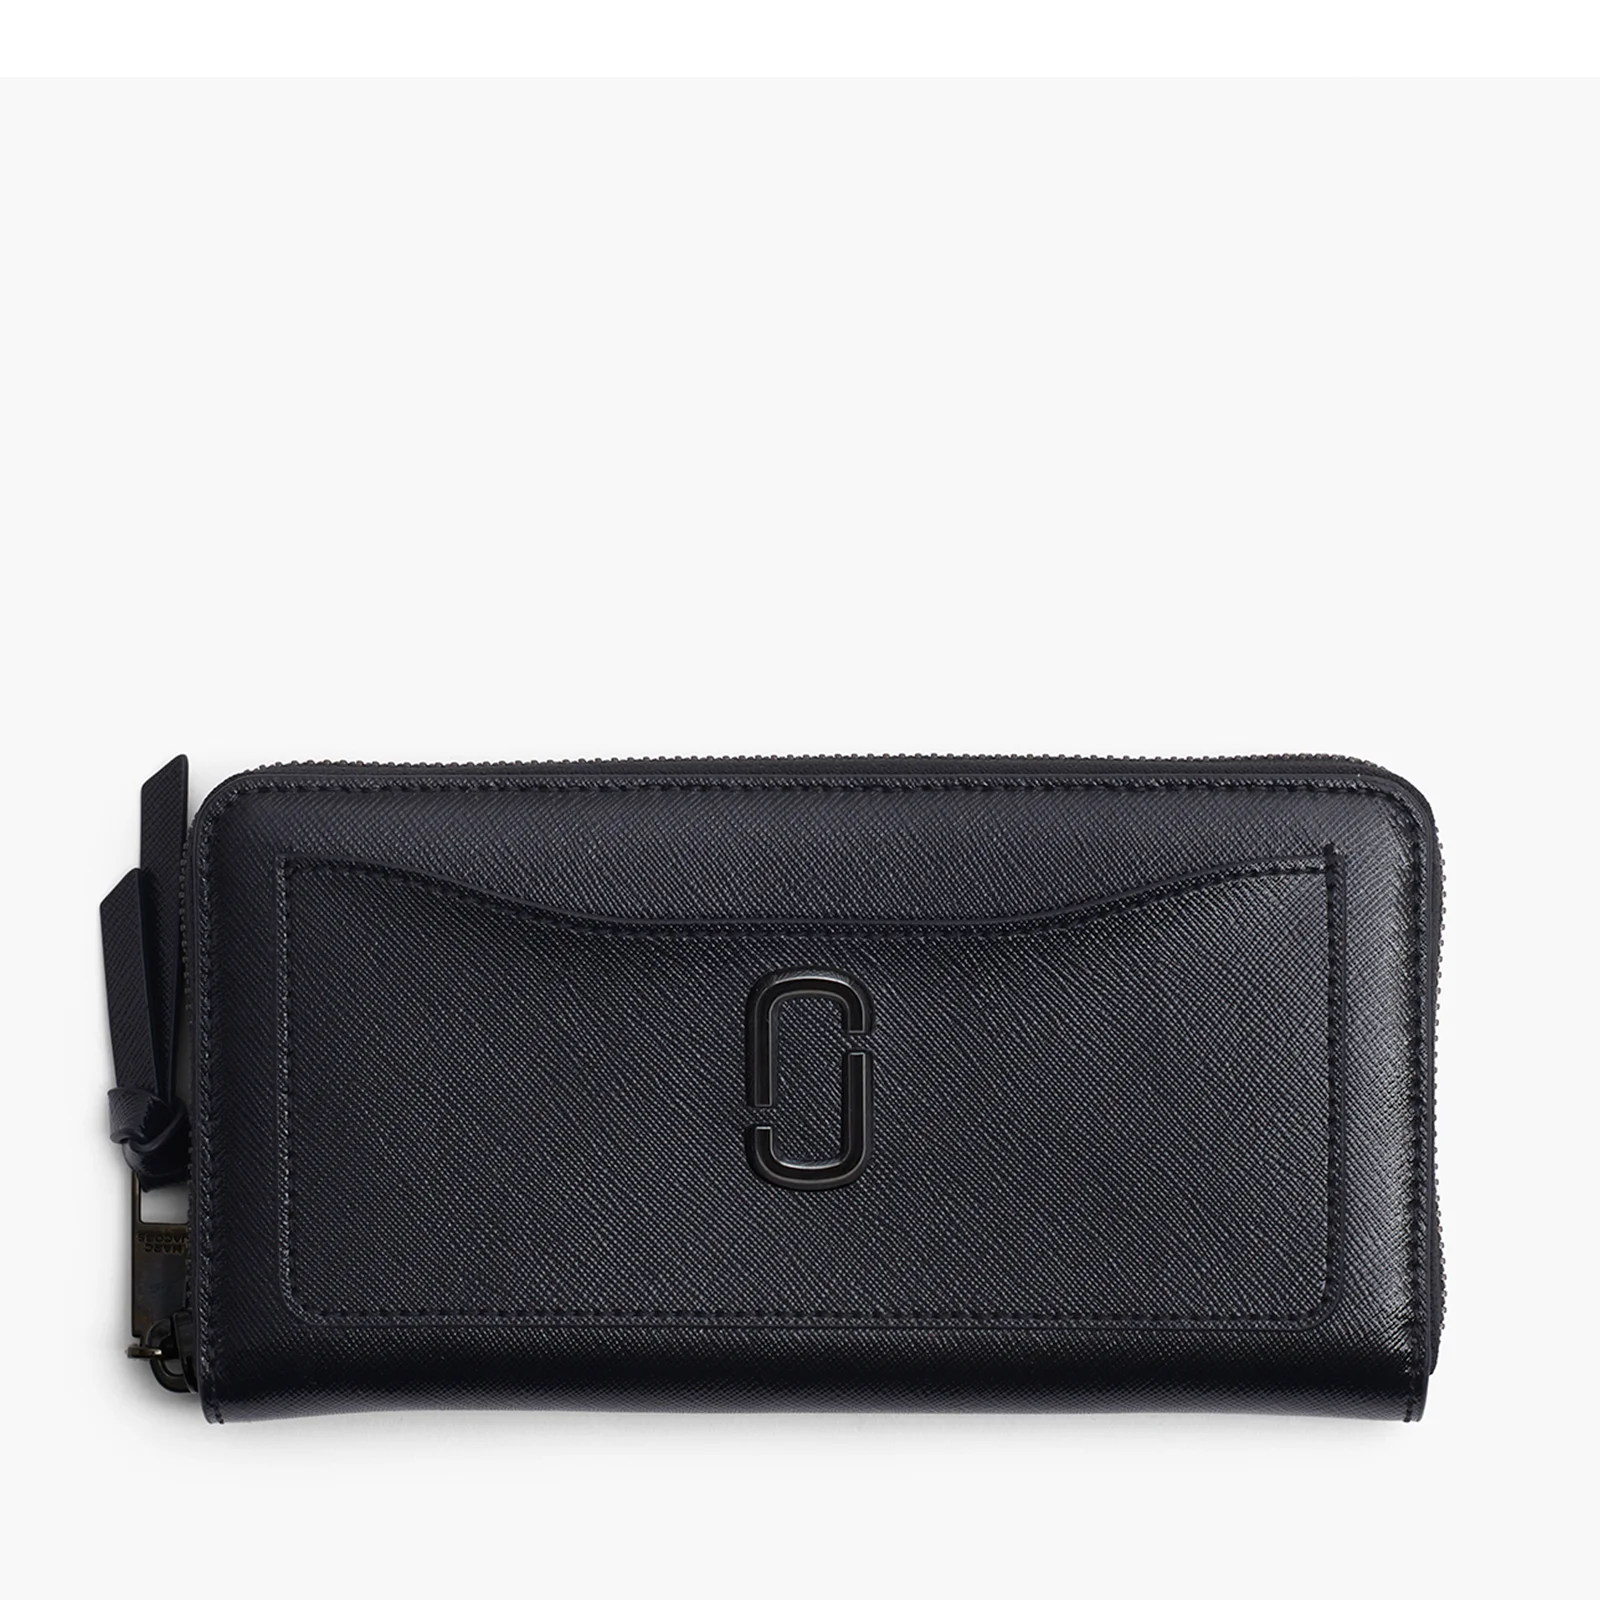 Marc Jacobs The Utility Snapshot DTM Continental Wallet in Leather Image 1